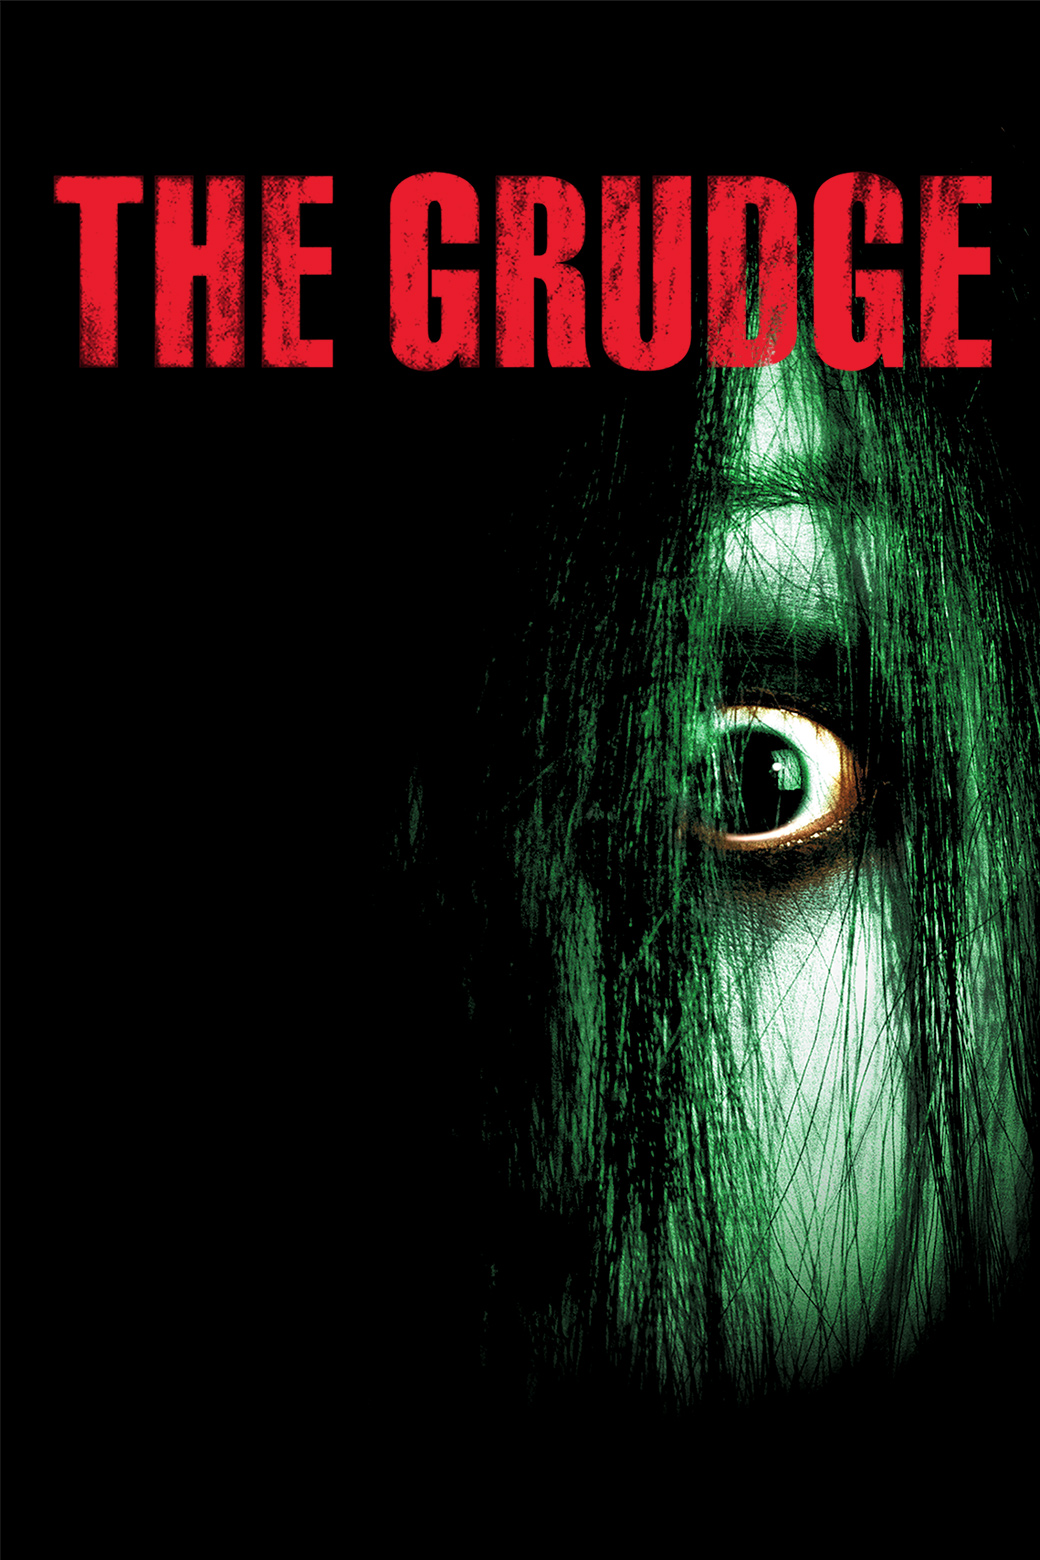 Watch The Grudge Online | Stream Full Movies